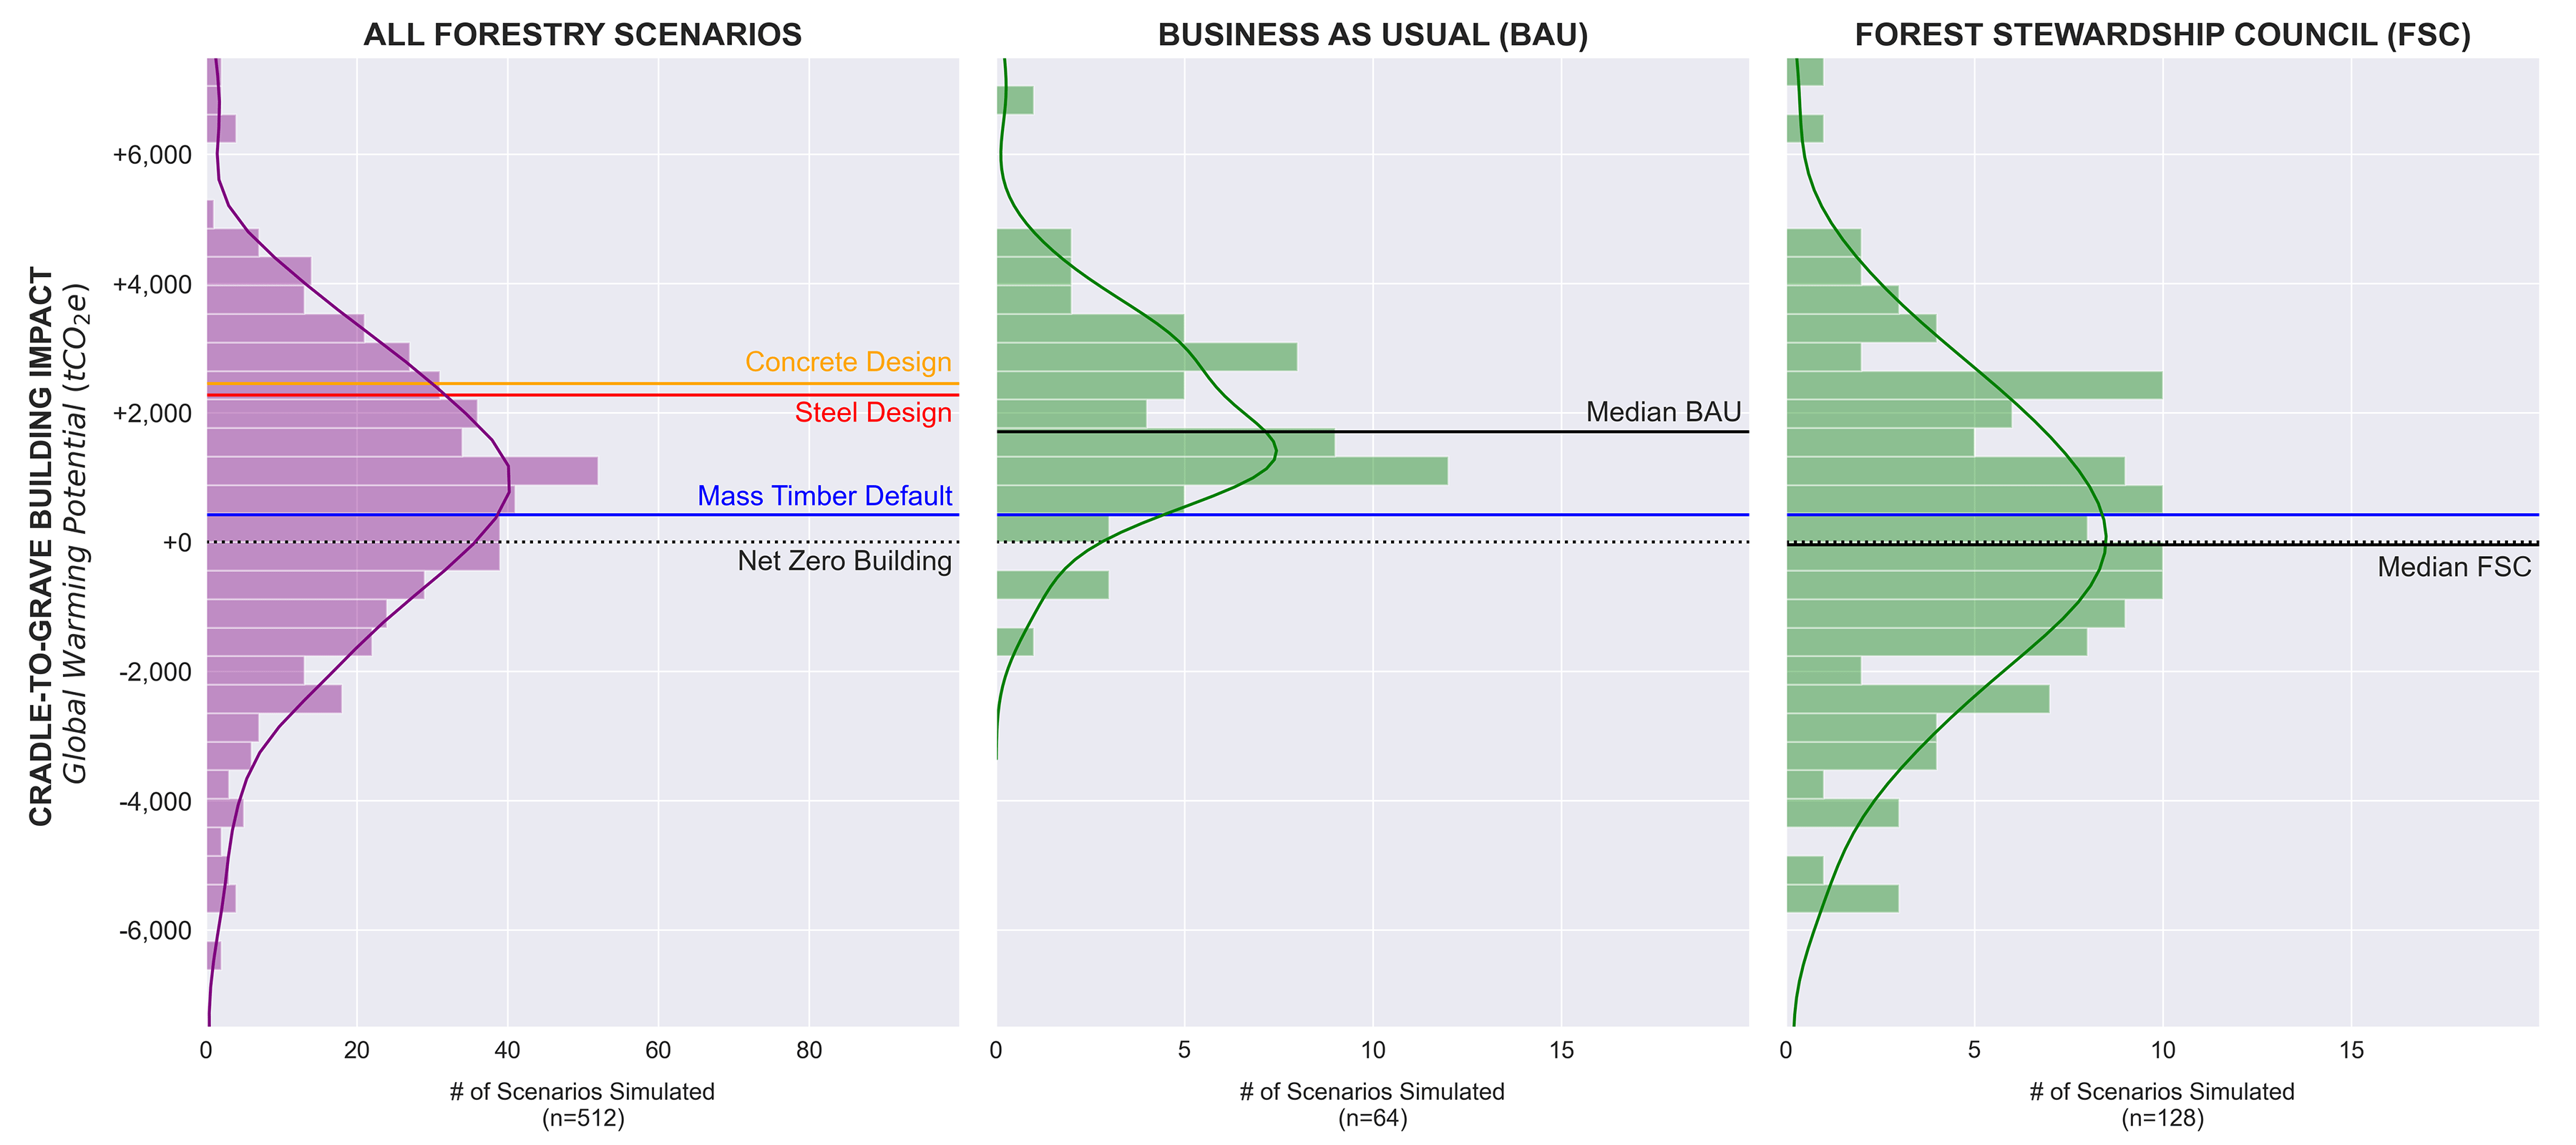 Three bar graphs arranged side-by-side, comparing "All forestry scenarios" with "Business as usual" and "Forest Stewardship Council (FSC)"